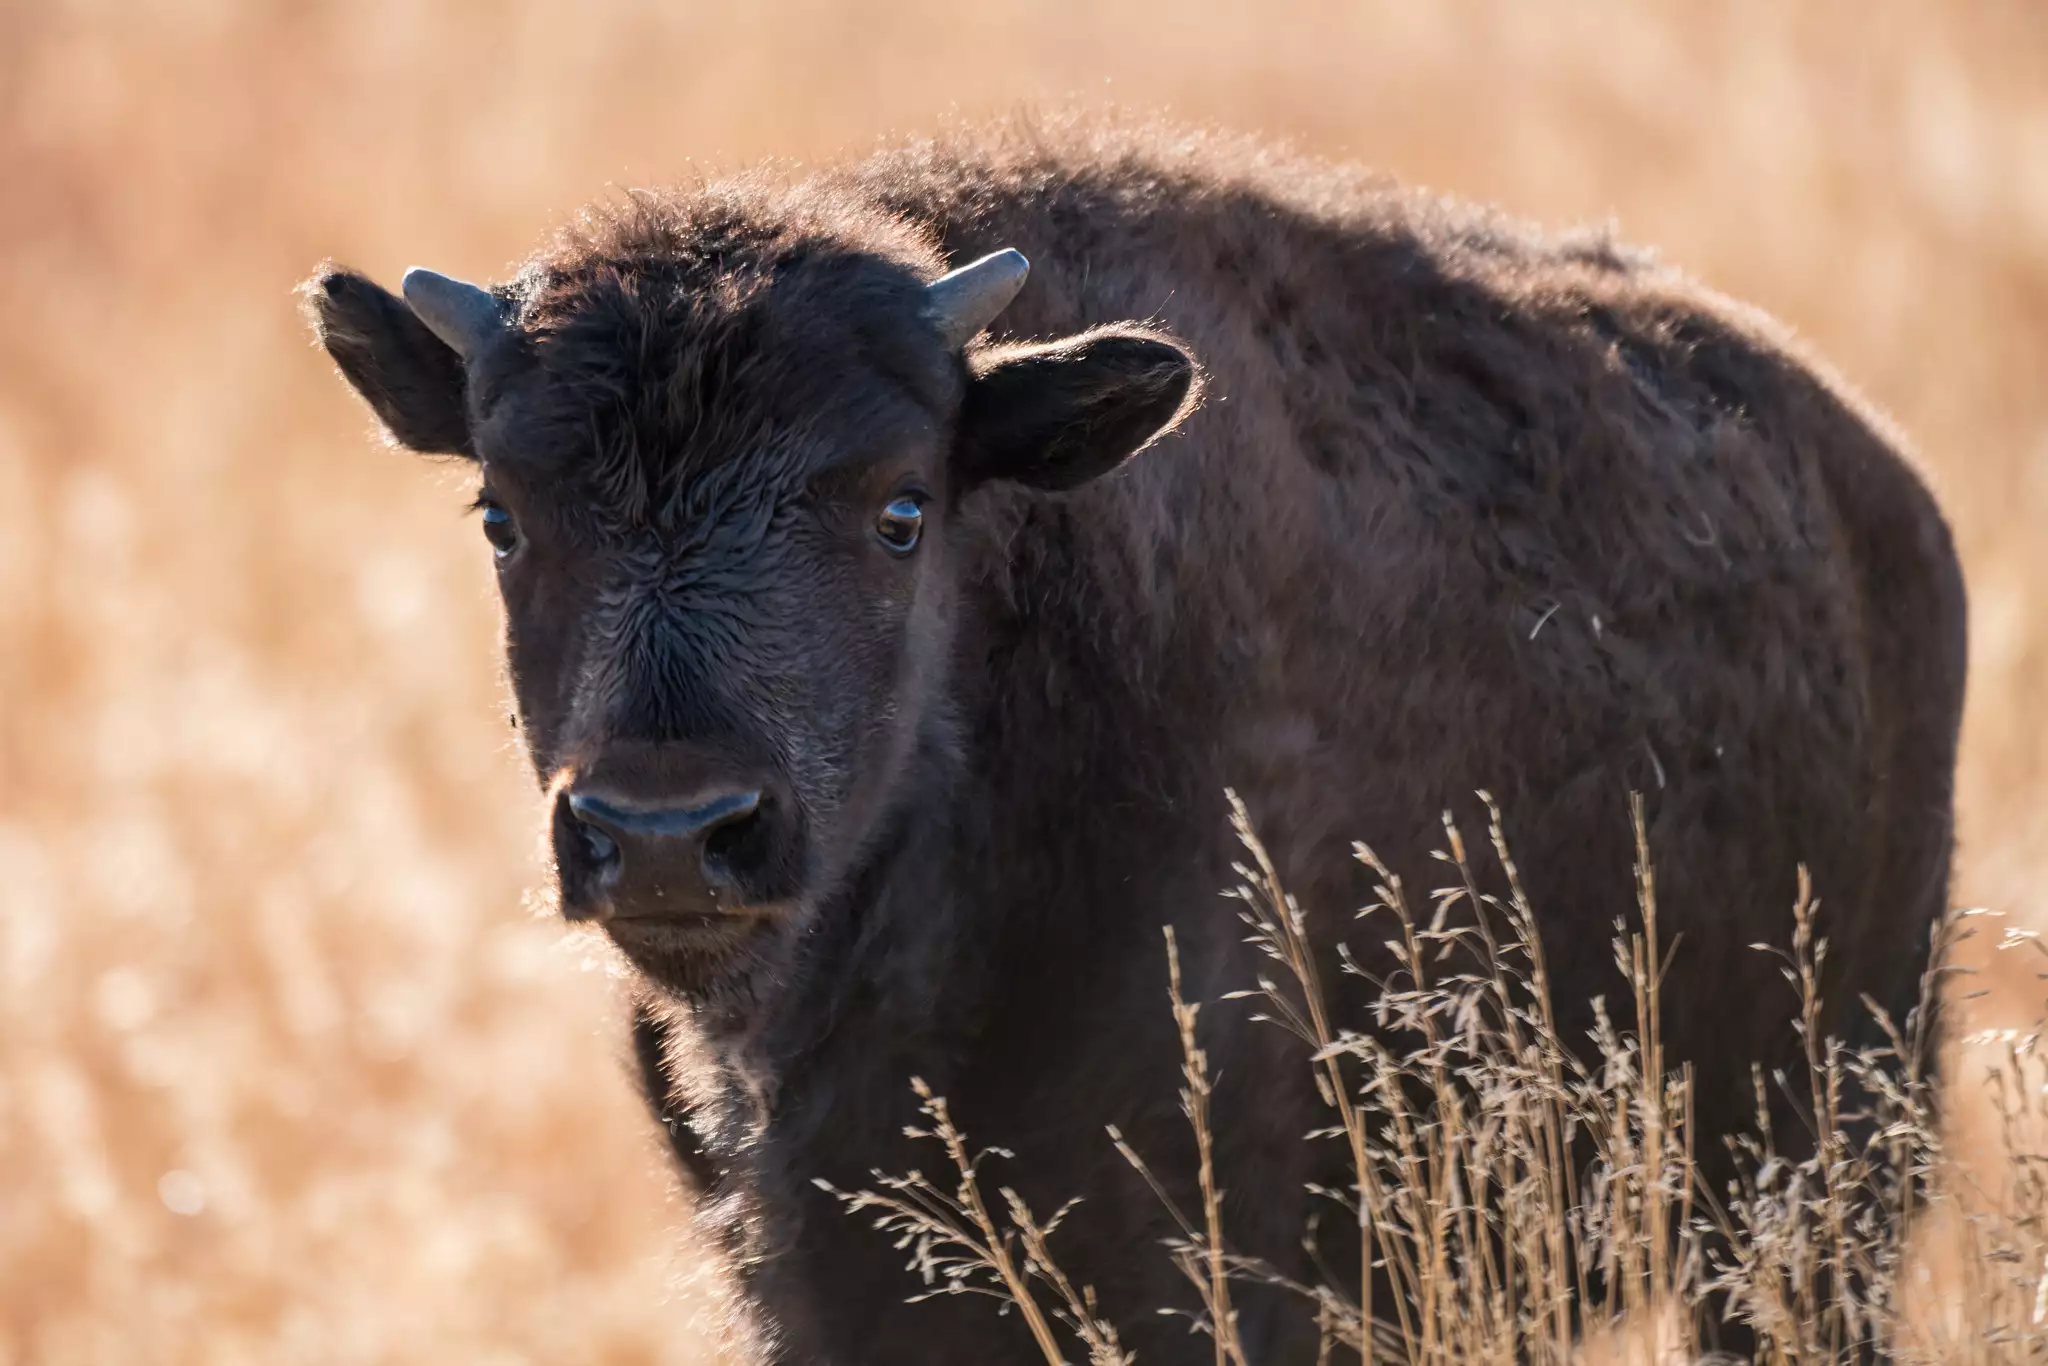 Young bison with short spike-horns at a 45-degree angle